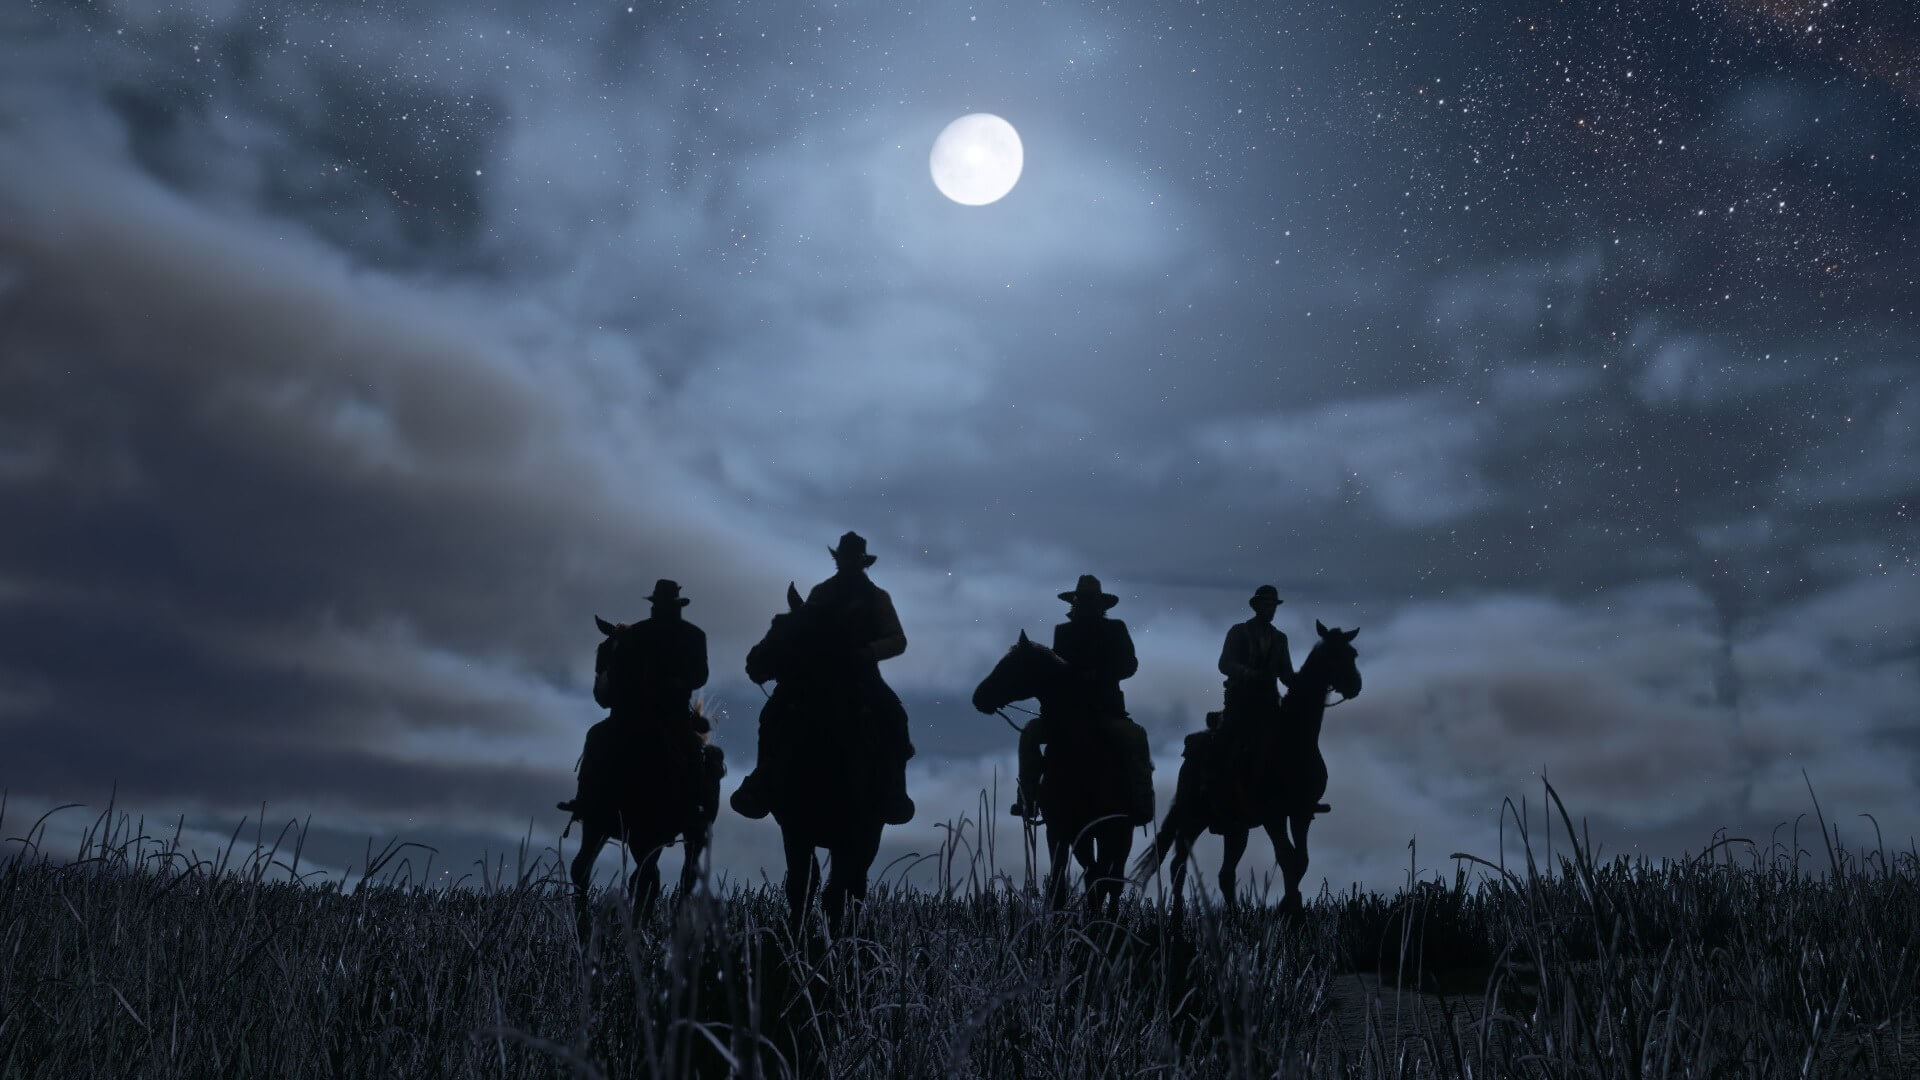 Microsoft giving $100 off Xbox One S and X with purchase of Red Dead Redemption 2